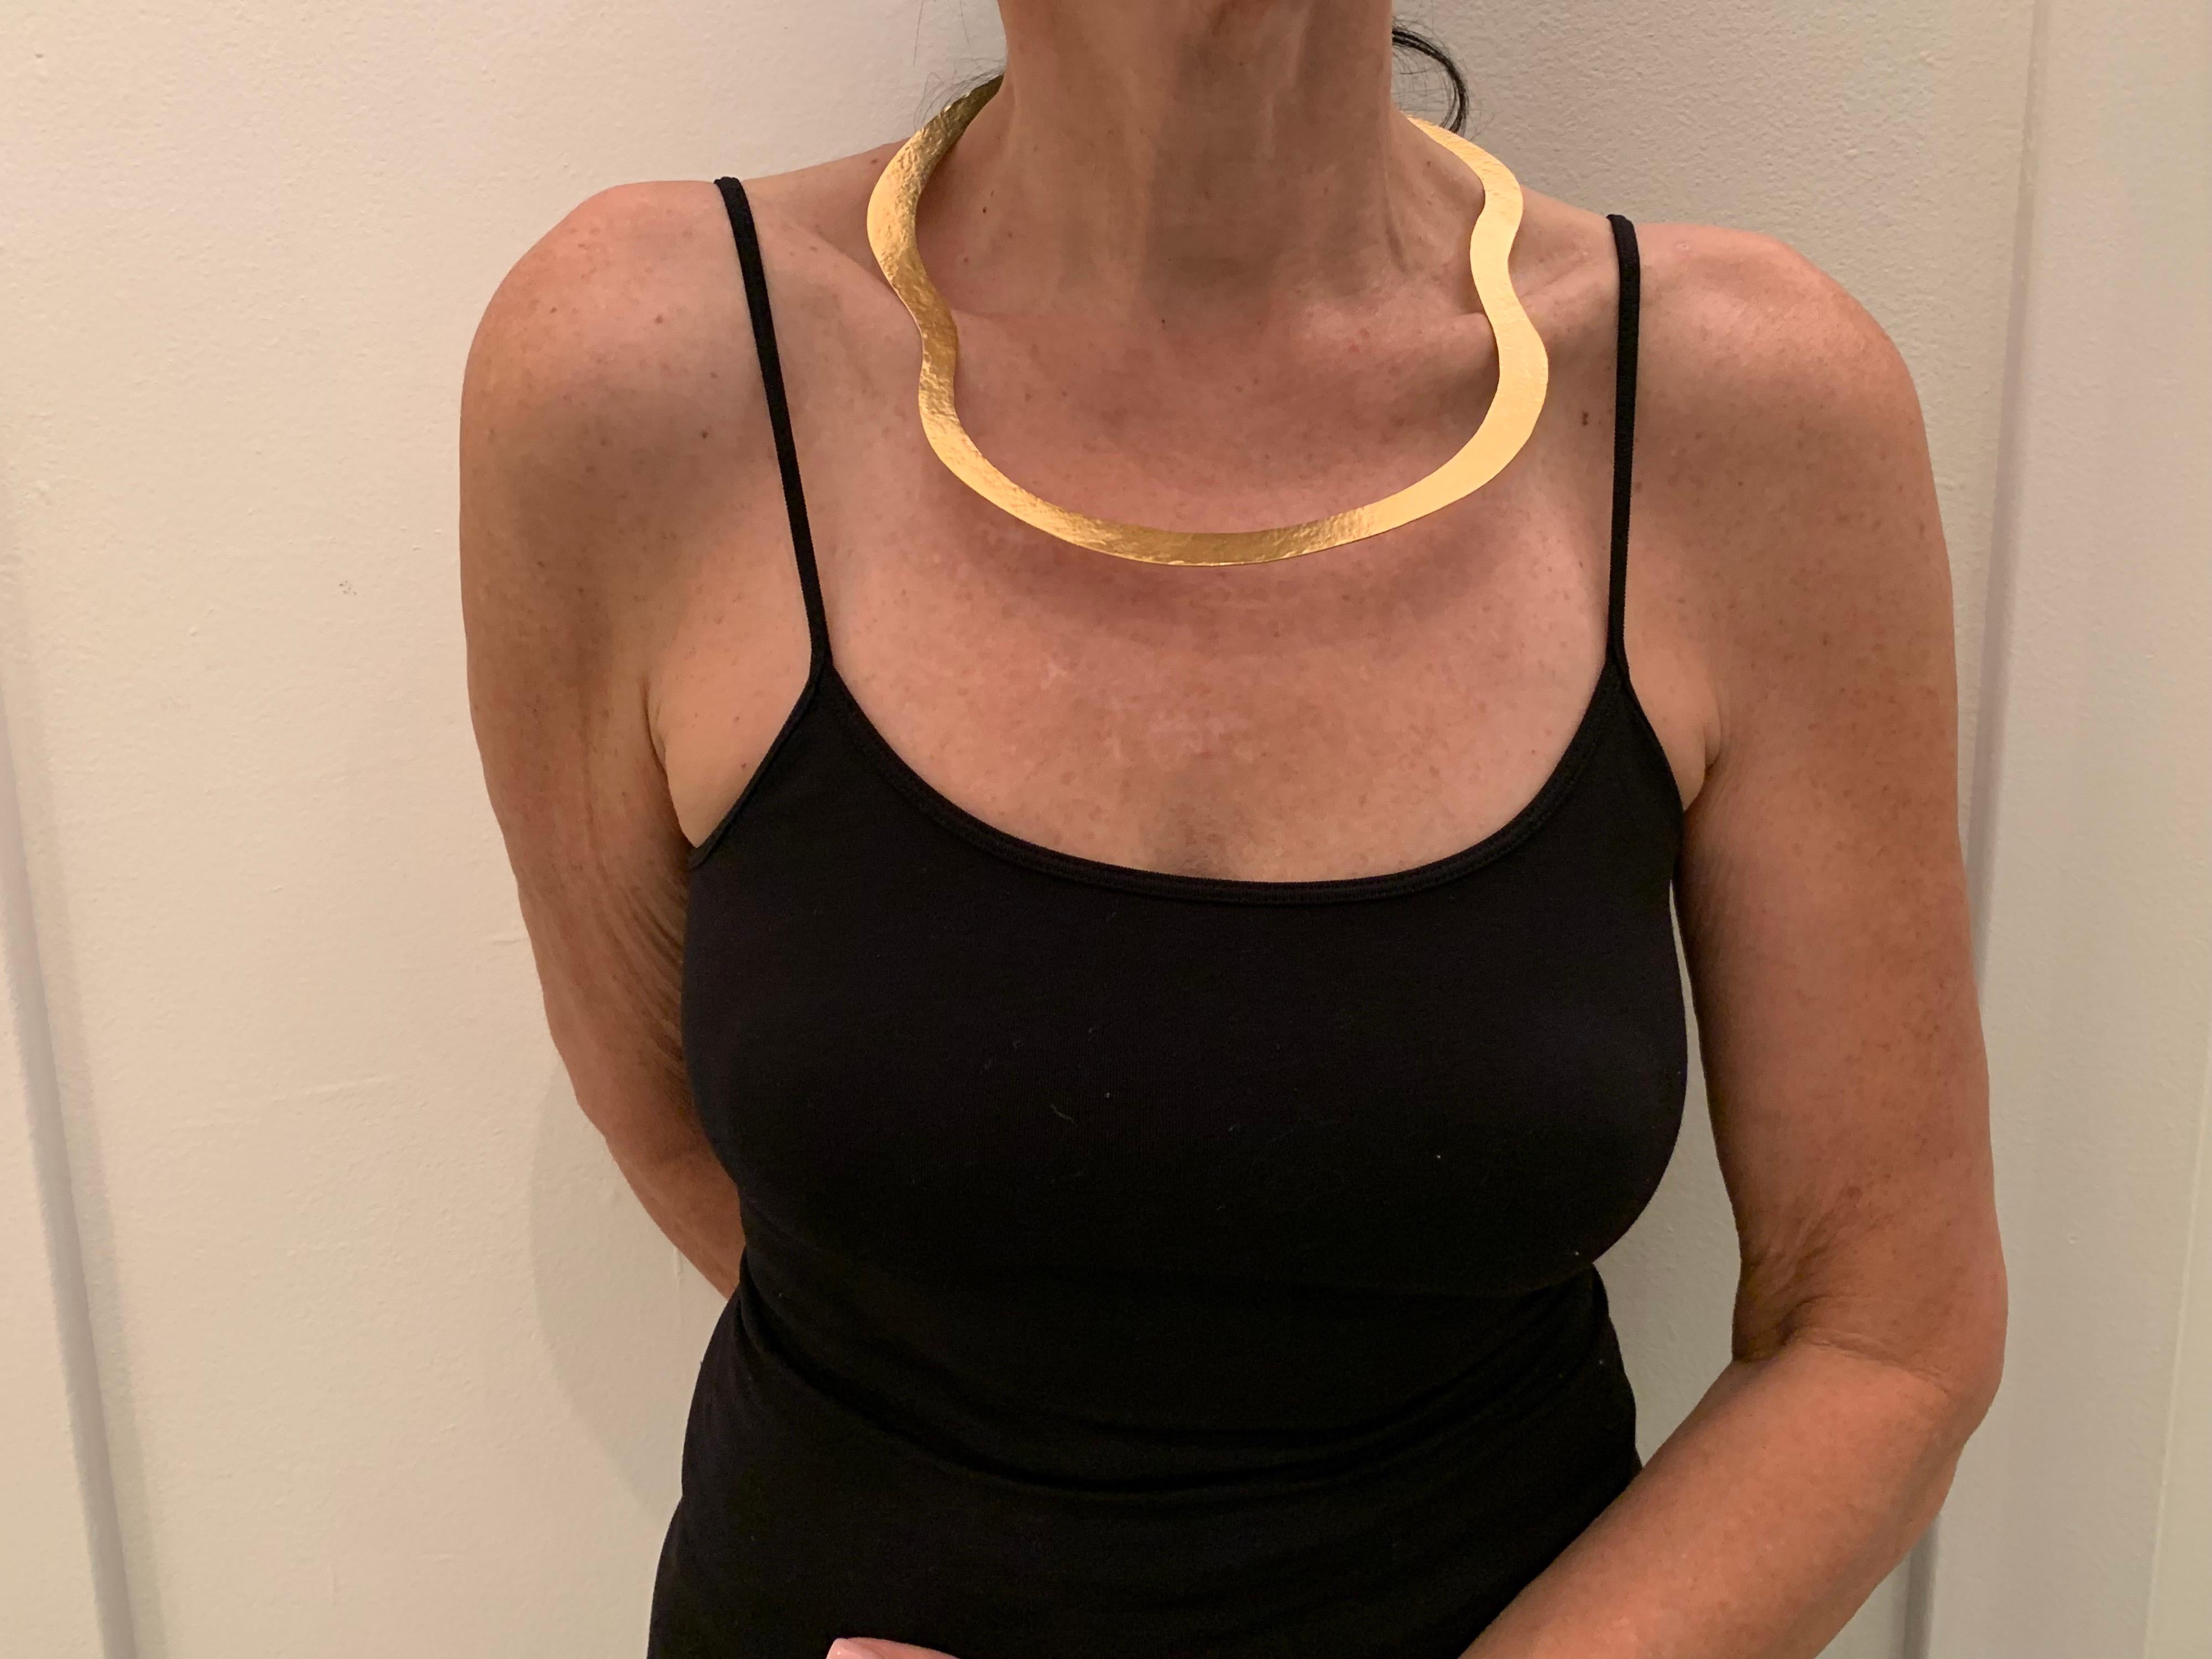 Stunning fashion-forward Parisian statement necklace! Unique creativity and design mixed with handcrafted quality in geometric harmony by a Parisian hand in the Marais. The geometric architectural statement necklace is comprised out of three